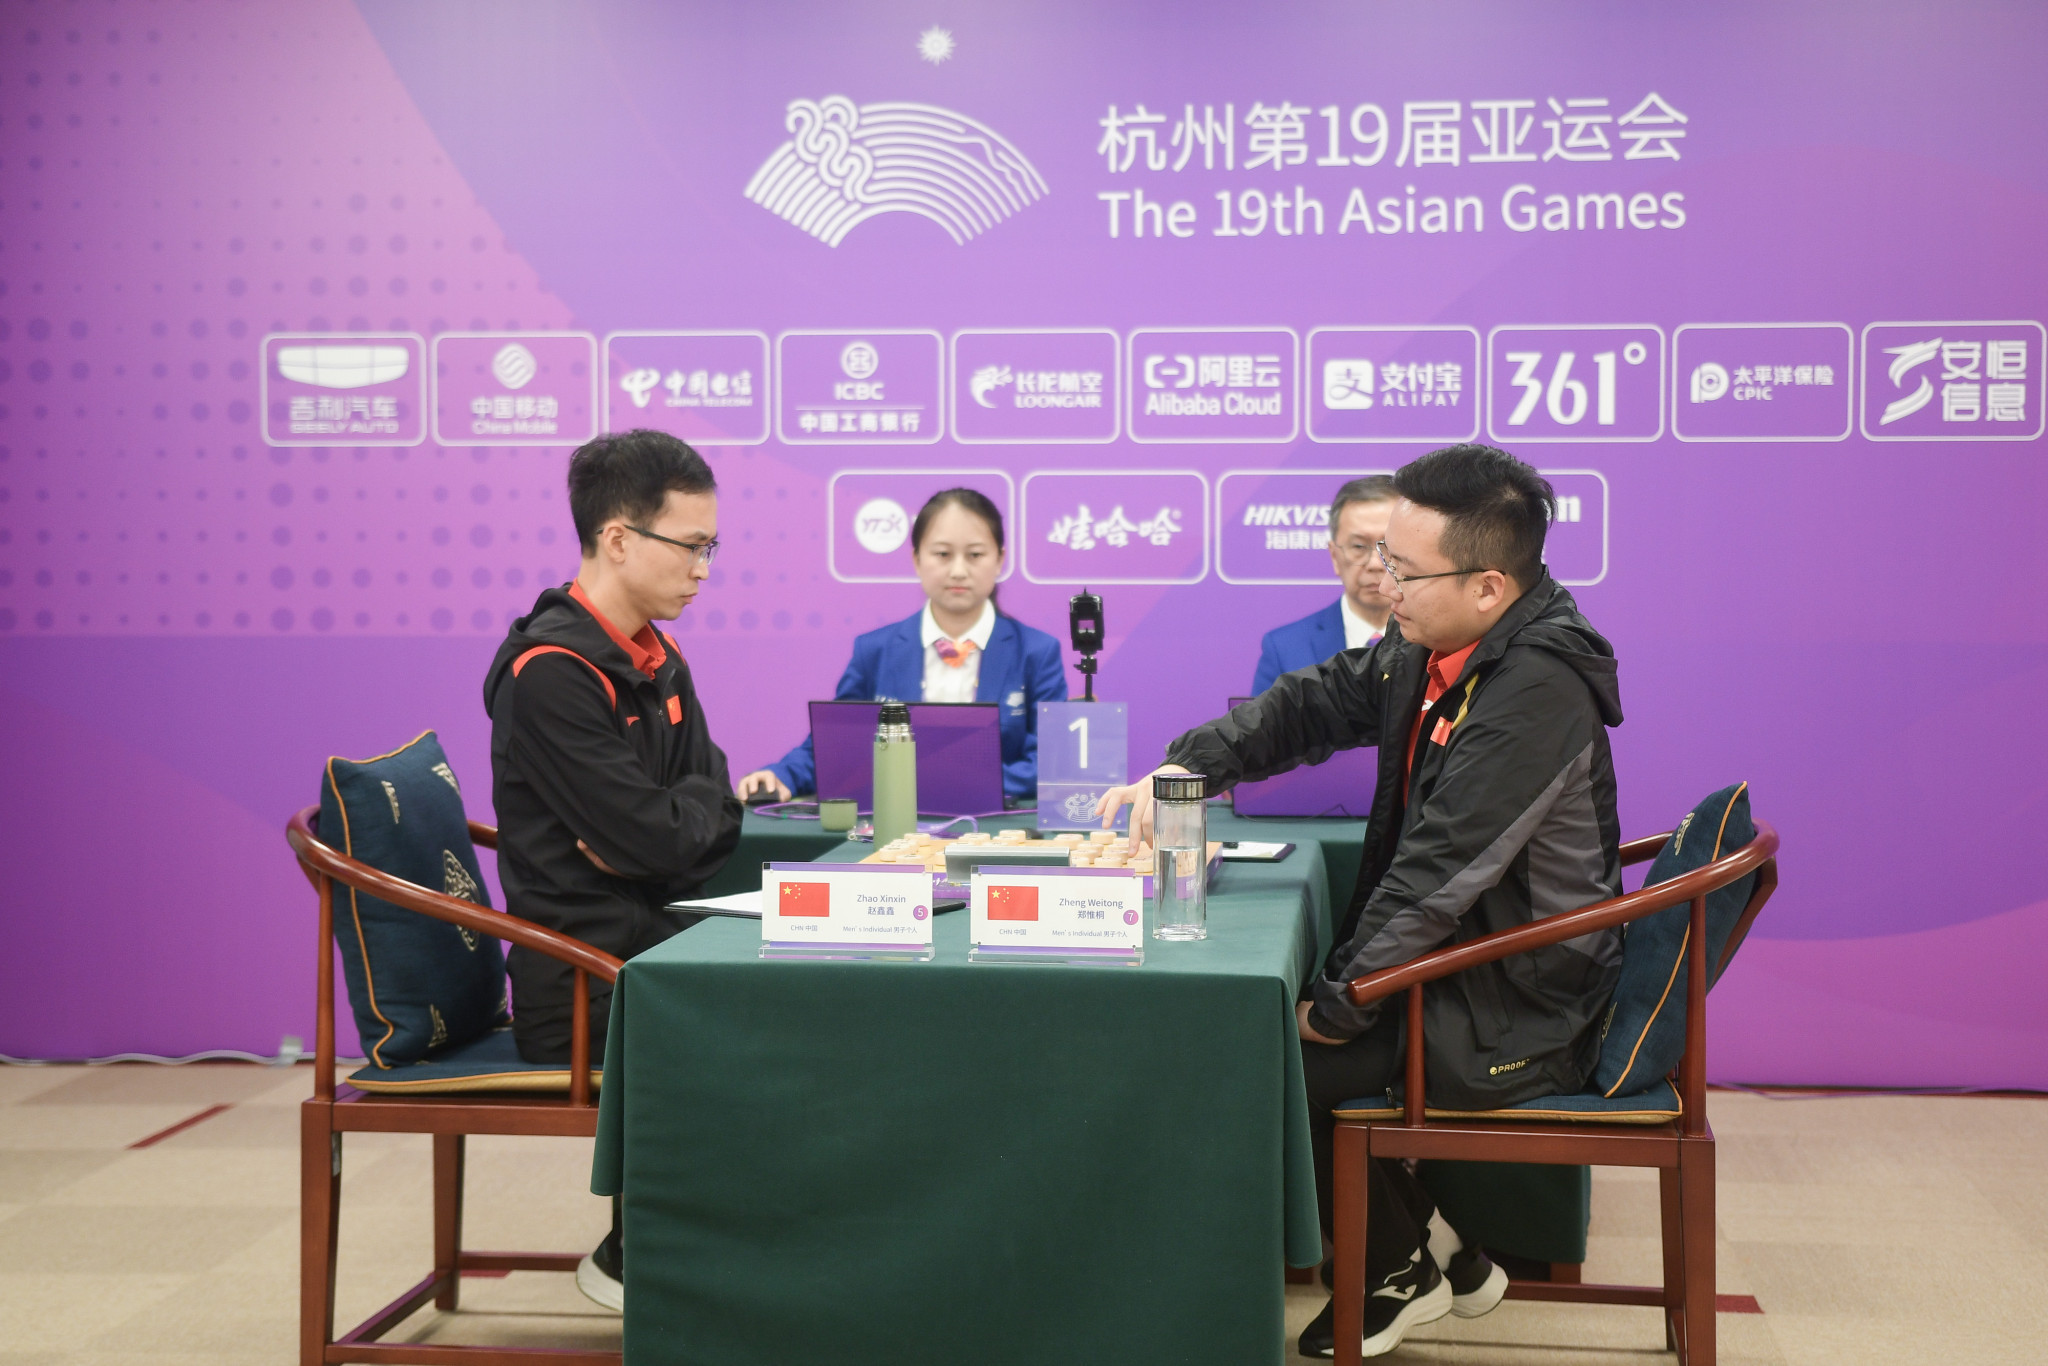 China won its 200th gold of the Games today, with men's xiangqi winner Zheng Weitong, right, claiming the milestone medal ©Hangzhou 2022